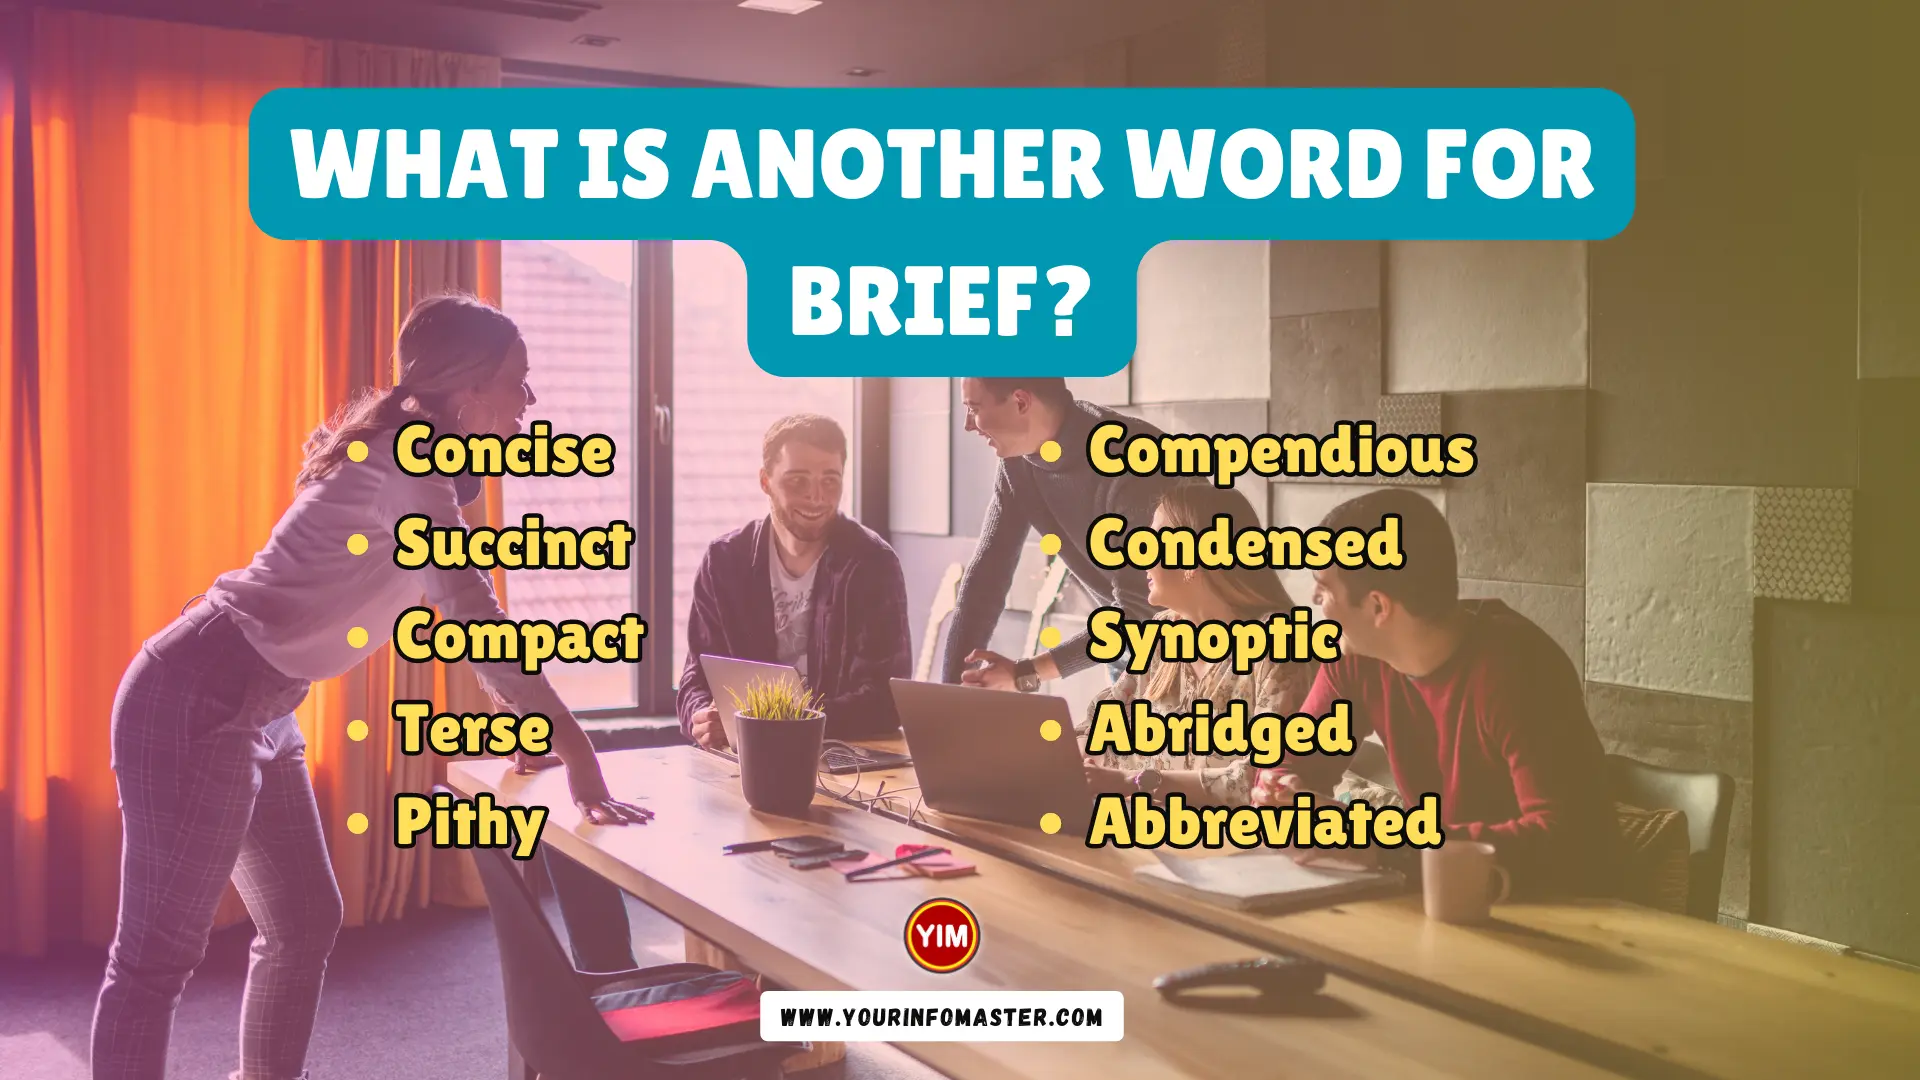 What is another word for Brief